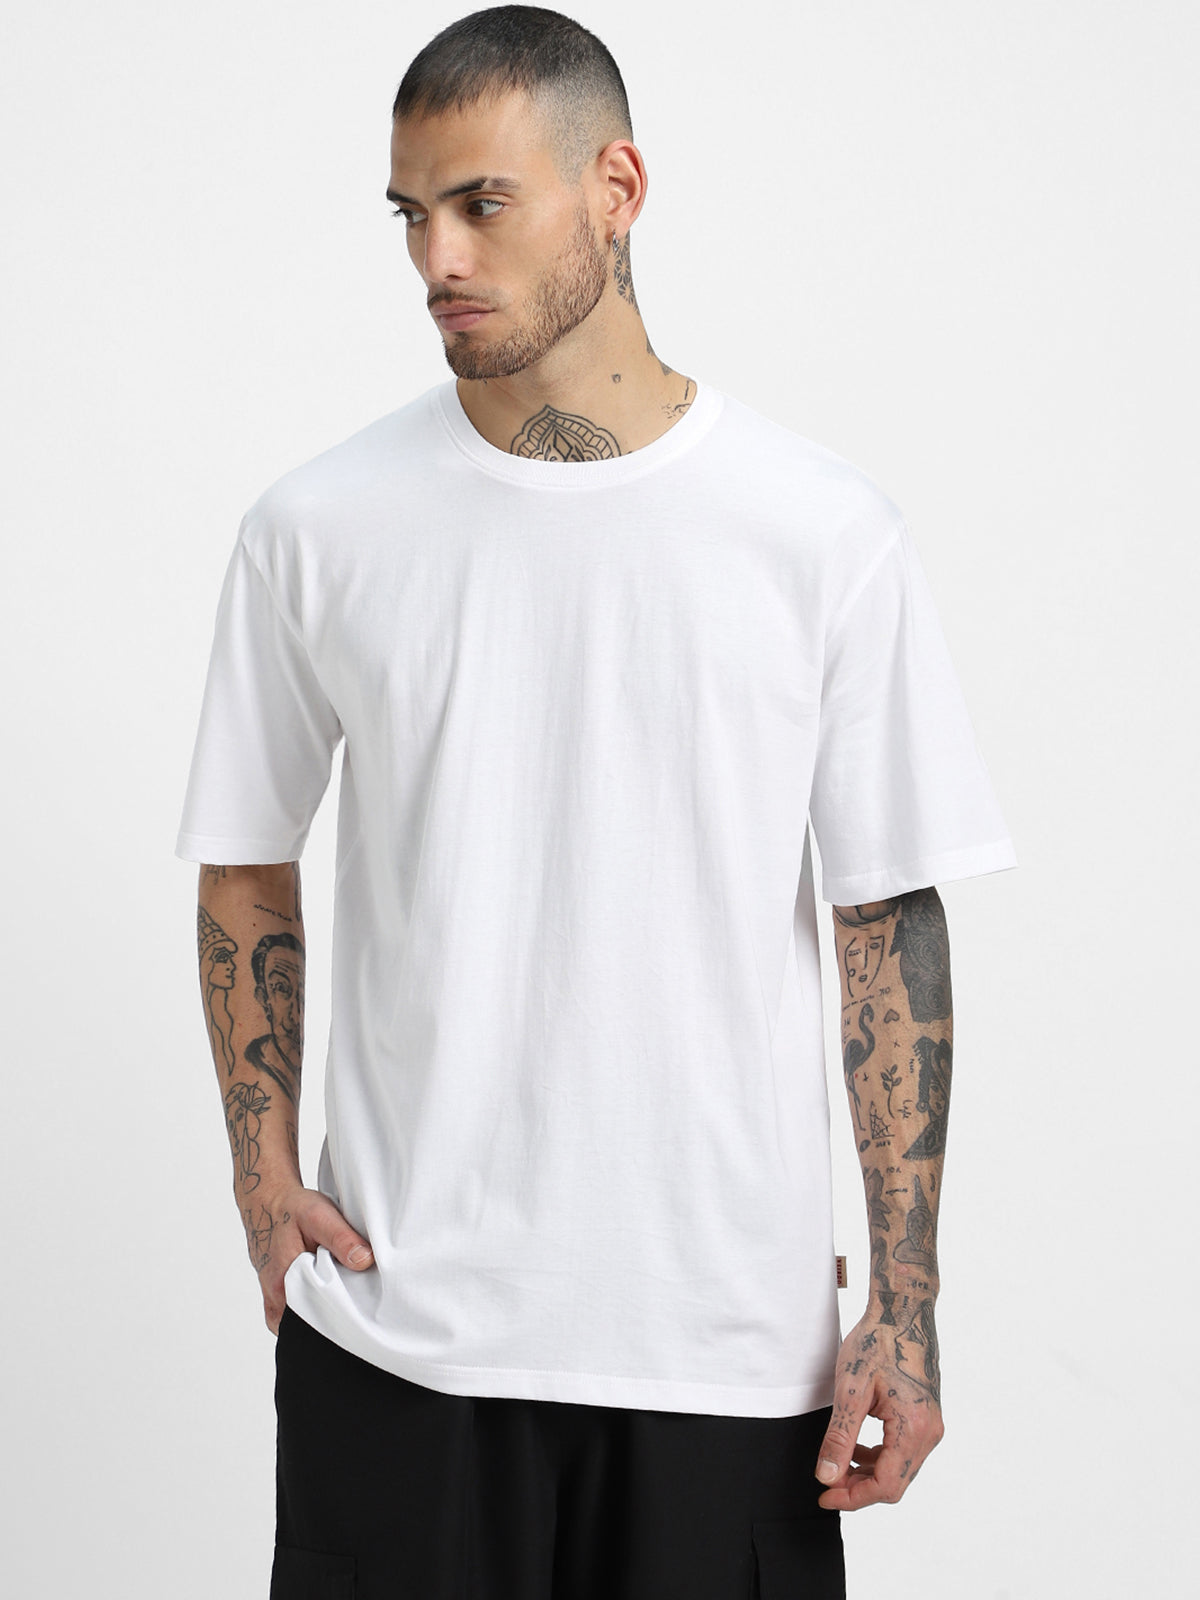 STAY WILD White Oversized Back Graphic Printed Tshirt